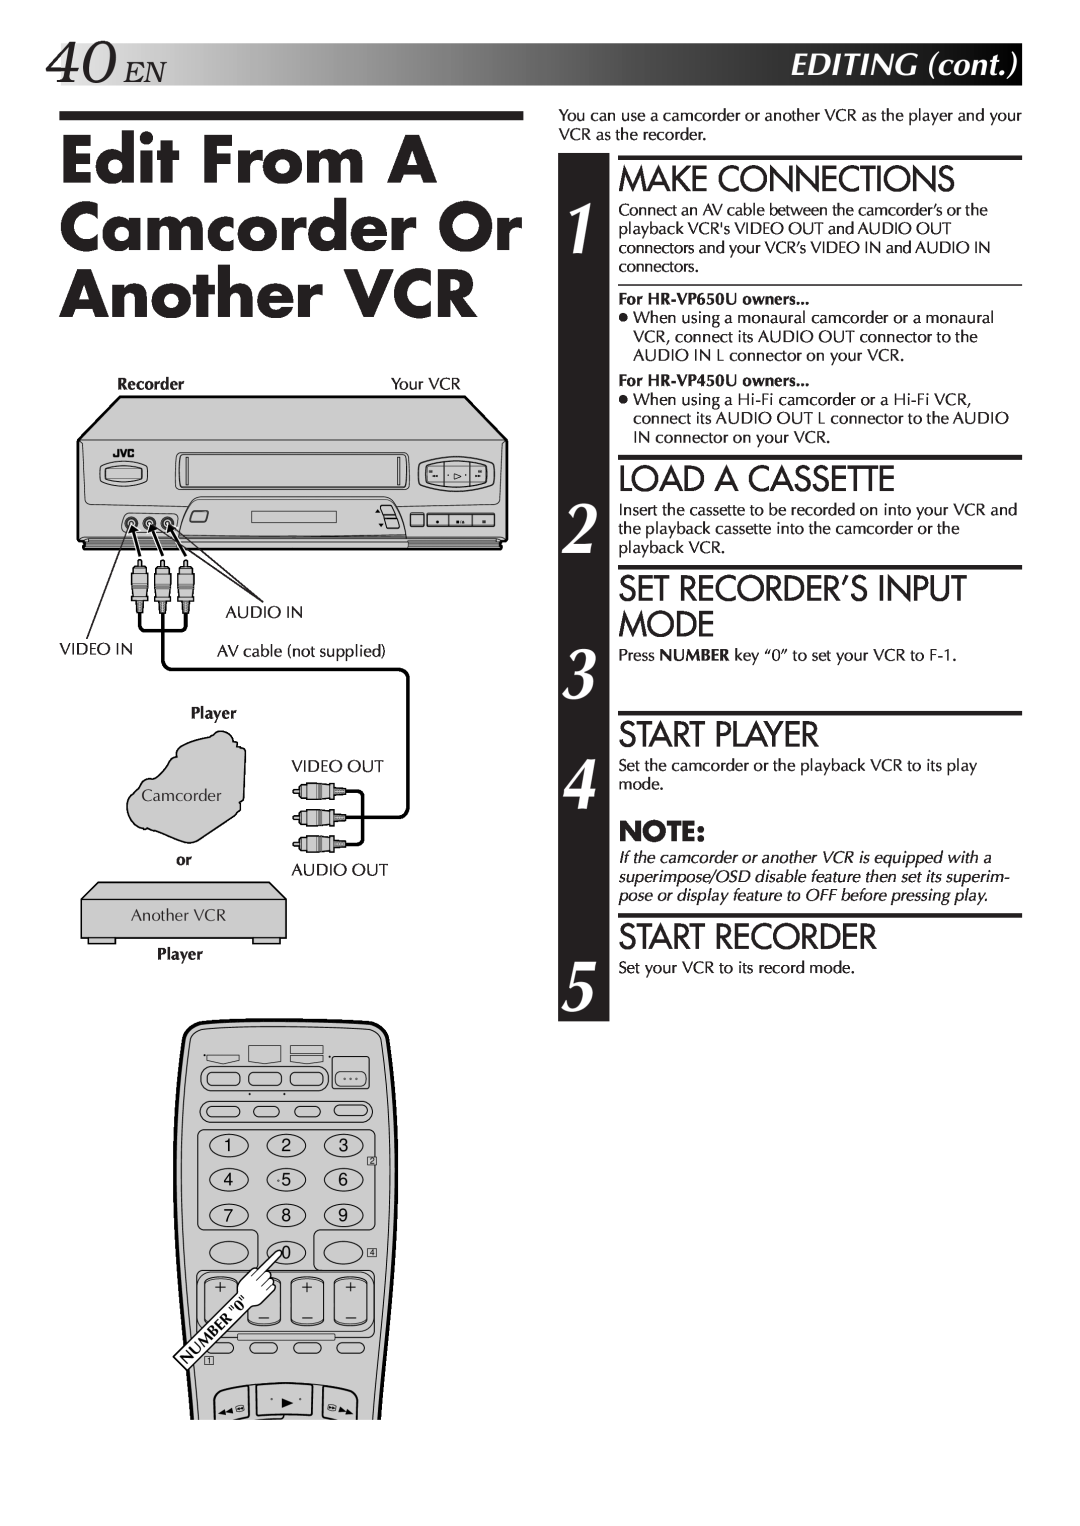 JVC HR-VP650U Edit From A Camcorder Or Another VCR, 40EN, Set Recorder’S Input Mode, EDITINGcont, Make Connections, Player 